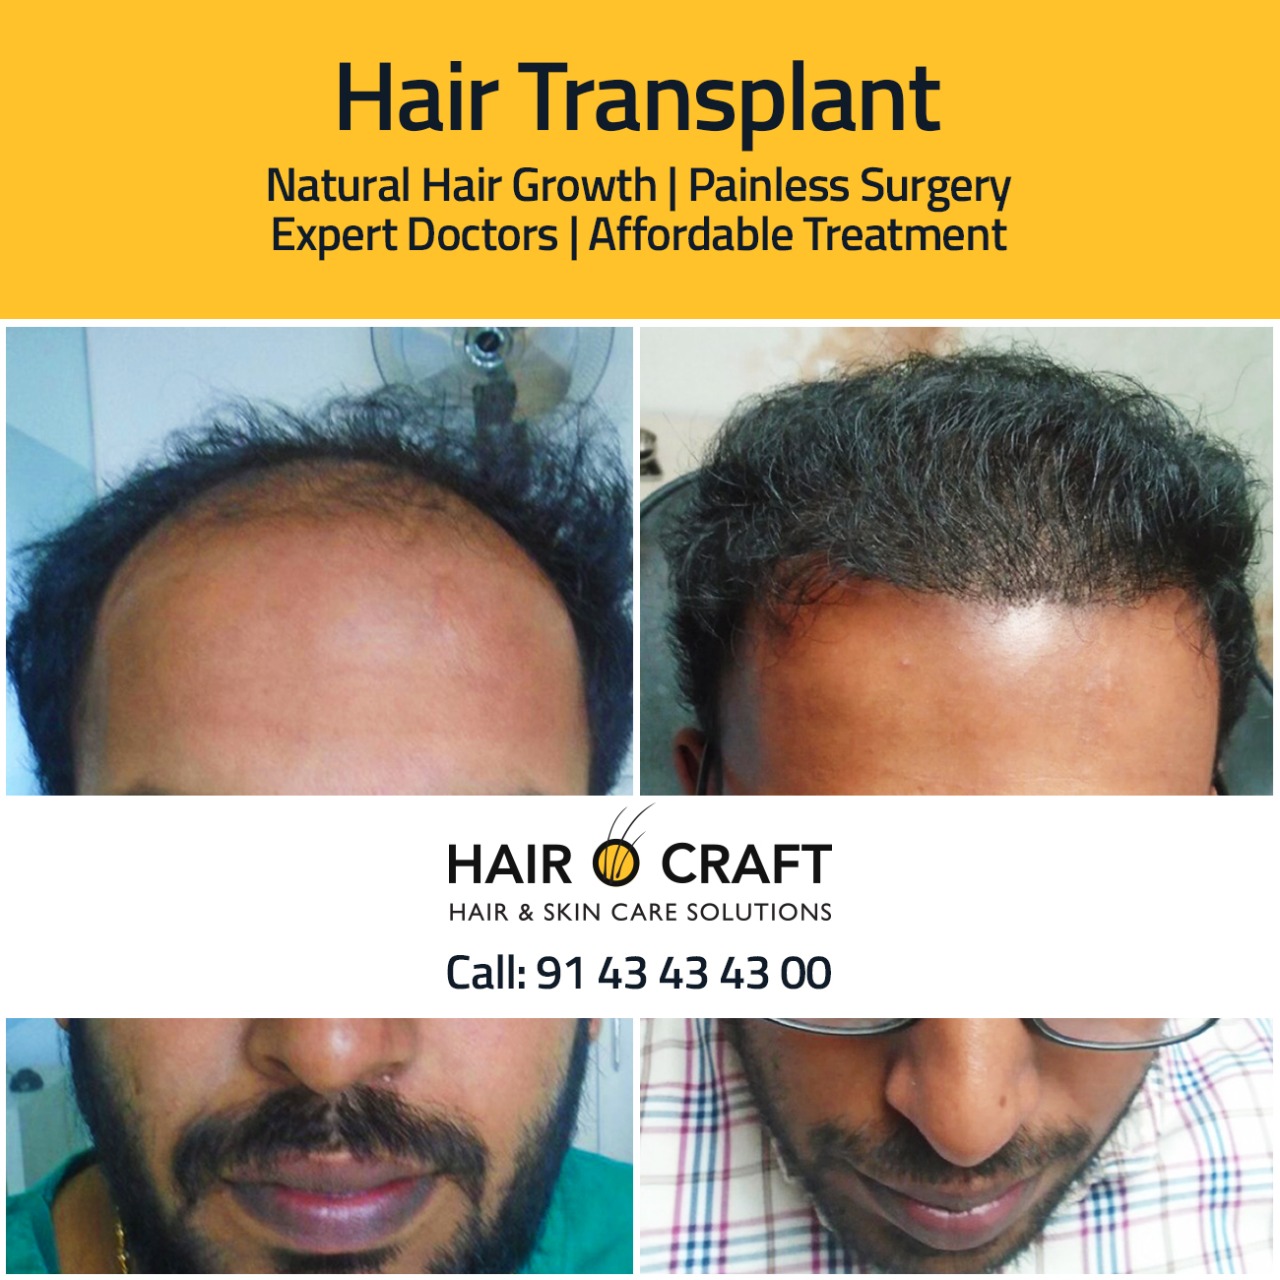 Hair Transplant in Bangalore  Best Results  Cost of Hair Transplant in  Bangalore  YouTube